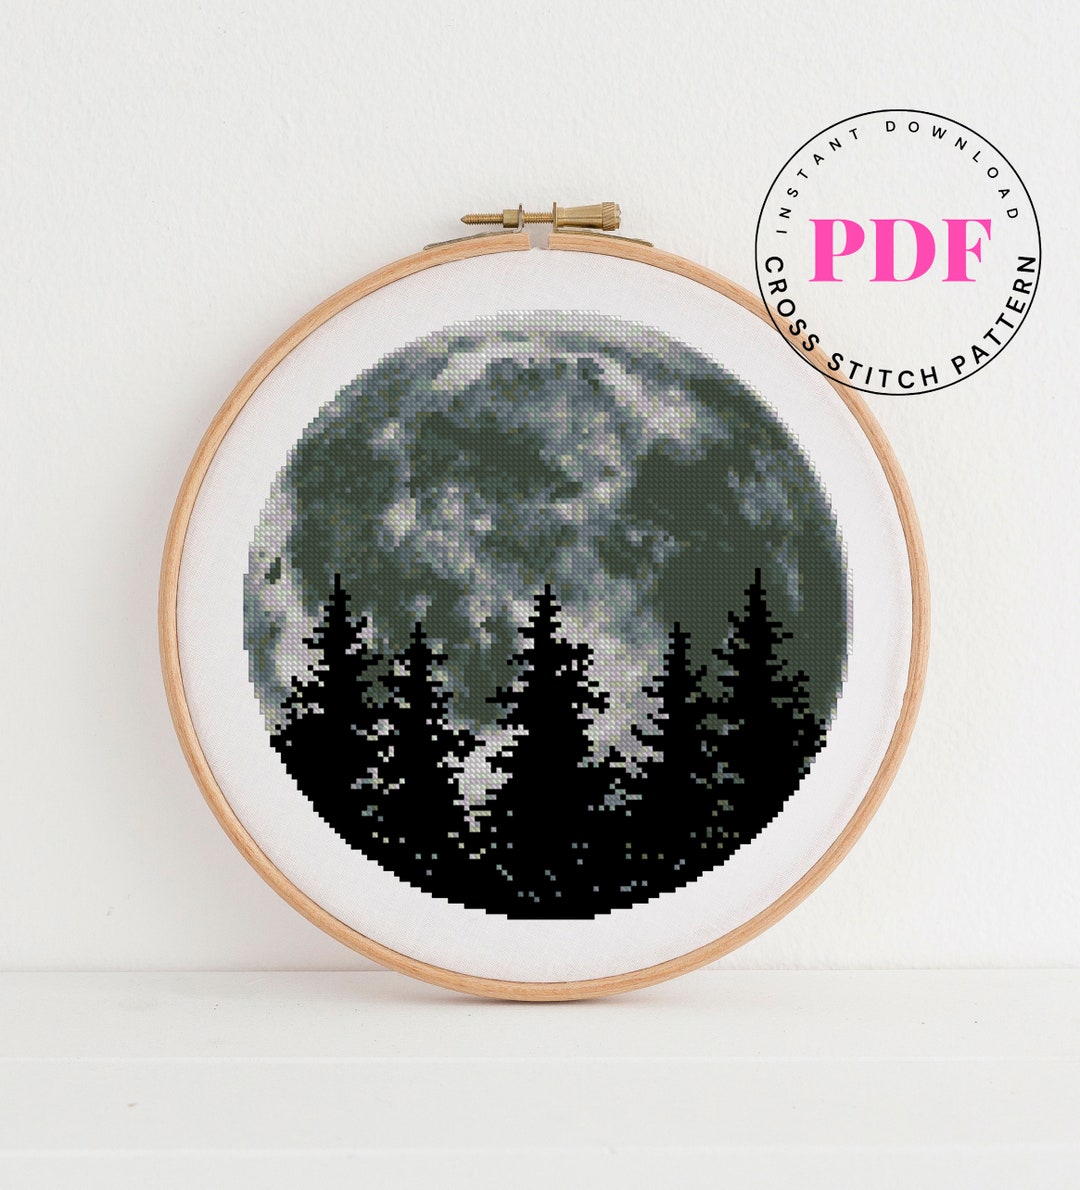 Moon Stamped Cross Stitch Kits - Needlepoint 11CT Counted Cross Stitch Kits  for Beginners Adults Stamped Cross-Stitch Tree Patterns Dimensions Embroidery  Kits Arts and Crafts Home Decor moon tree cross stitch kits